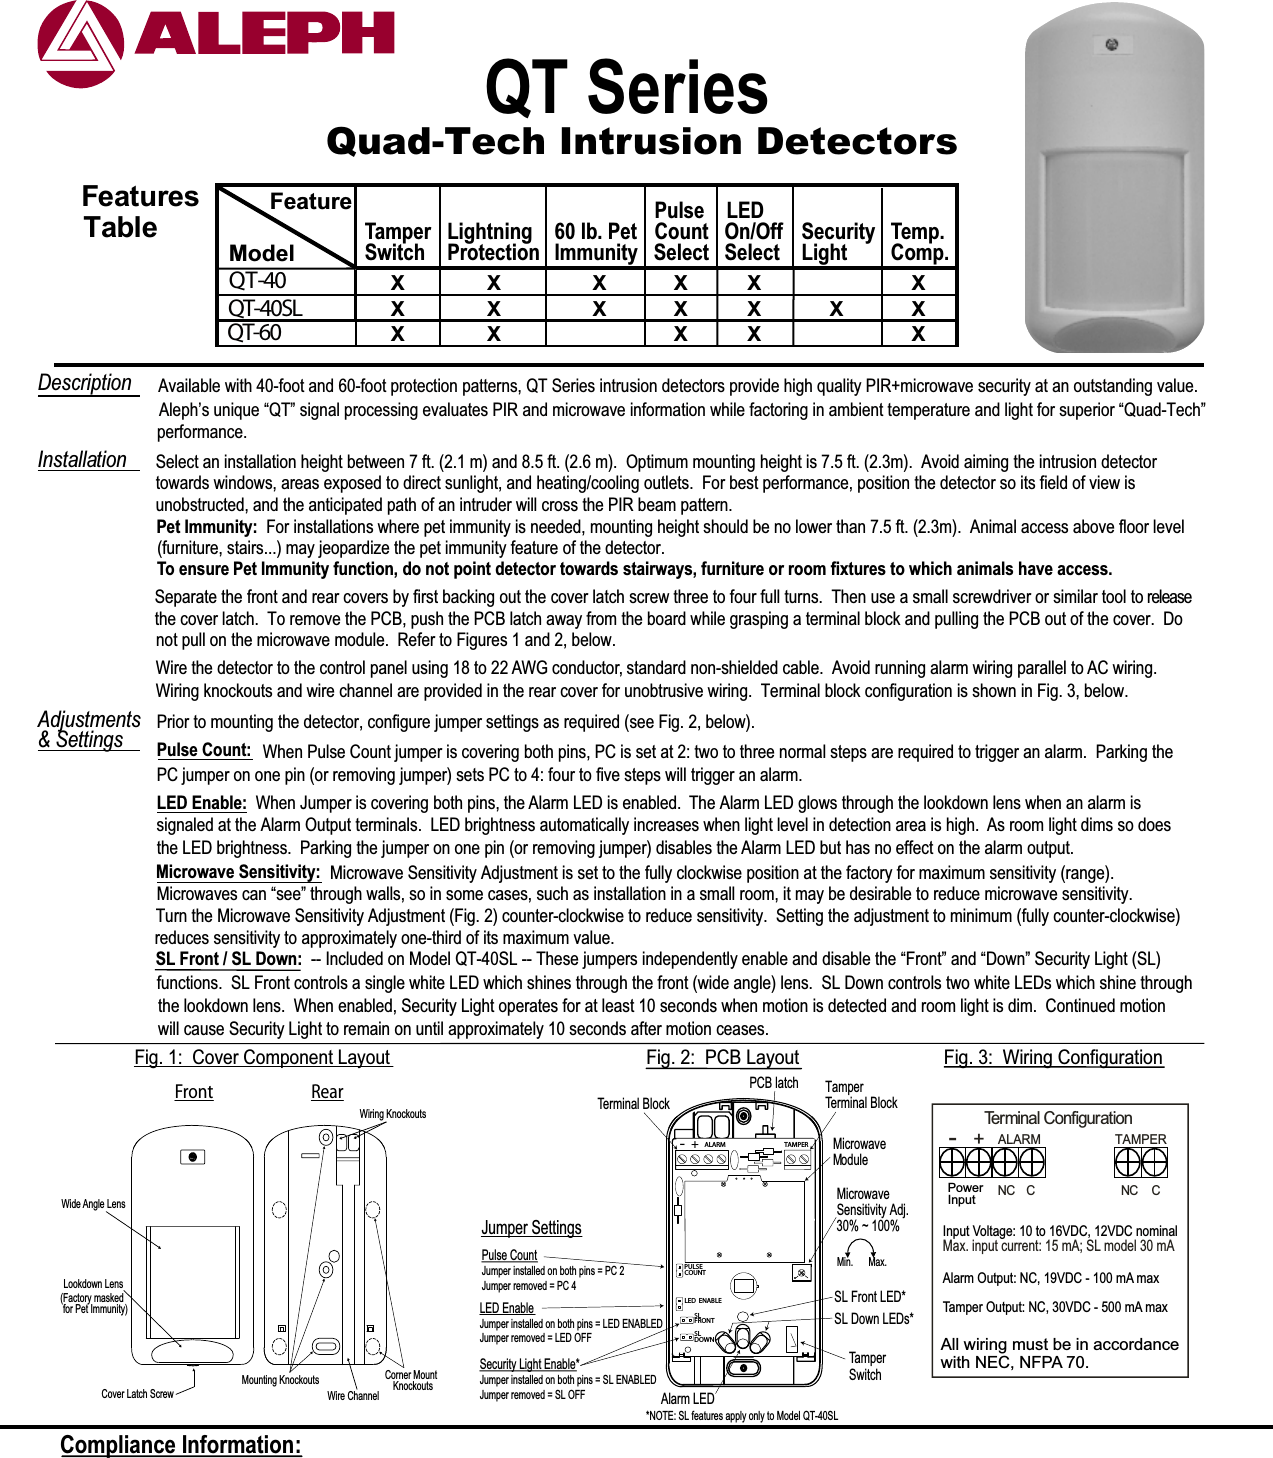 Quad-Tech Intrusion DetectorsQT Series Select an installation height between 7 ft. (2.1 m) and 8.5 ft. (2.6 m).  Optimum mounting height is 7.5 ft. (2.3m).  Avoid aiming the intrusion detectortowards windows, areas exposed to direct sunlight, and heating/cooling outlets.  For best performance, position the detector so its field of view isunobstructed, and the anticipated path of an intruder will cross the PIR beam pattern.Wire the detector to the control panel using 18 to 22 AWG conductor, standard non-shielded cable.  Avoid running alarm wiring parallel to AC wiring. Wiring knockouts and wire channel are provided in the rear cover for unobtrusive wiring.  Terminal block configuration is shown in Fig. 3, below.Prior to mounting the detector, configure jumper settings as required (see Fig. 2, below).Pulse Count: When Pulse Count jumper is covering both pins, PC is set at 2: two to three normal steps are required to trigger an alarm.  Parking thePC jumper on one pin (or removing jumper) sets PC to 4: four to five steps will trigger an alarm. LED Enable:  When Jumper is covering both pins, the Alarm LED is enabled.  The Alarm LED glows through the lookdown lens when an alarm issignaled at the Alarm Output terminals.  LED brightness automatically increases when light level in detection area is high.  As room light dims so doesthe LED brightness.  Parking the jumper on one pin (or removing jumper) disables the Alarm LED but has no effect on the alarm output.&amp; SettingsInstallationDescription   Available with 40-foot and 60-foot protection patterns, QT Series intrusion detectors provide high quality PIR+microwave security at an outstanding value. Front RearWiring KnockoutsCorner Mount    KnockoutsWire ChannelCover Latch ScrewLookdown LensMounting KnockoutsWide Angle LensFig. 1:  Cover Component LayoutTerminal ConfigurationNC  CALARM TAMPERNC C-+Fig. 3:  Wiring ConfigurationFig. 2:  PCB LayoutCompliance Information: Separate the front and rear covers by first backing out the cover latch screw three to four full turns.  Then use a small screwdriver or similar tool to releasethe cover latch.  To remove the PCB, push the PCB latch away from the board while grasping a terminal block and pulling the PCB out of the cover.  Donot pull on the microwave module.  Refer to Figures 1 and 2, below.performance.Microwave Sensitivity Adj.Microwave Sensitivity: Microwave Sensitivity Adjustment is set to the fully clockwise position at the factory for maximum sensitivity (range).Turn the Microwave Sensitivity Adjustment (Fig. 2) counter-clockwise to reduce sensitivity.  Setting the adjustment to minimum (fully counter-clockwise)reduces sensitivity to approximately one-third of its maximum value.30% ~ 100%Microwaves can “see” through walls, so in some cases, such as installation in a small room, it may be desirable to reduce microwave sensitivity.AdjustmentsAleph’s unique “QT” signal processing evaluates PIR and microwave information while factoring in ambient temperature and light for superior “Quad-Tech”(Factory maskedfor Pet Immunity)(furniture, stairs...) may jeopardize the pet immunity feature of the detector.Pet Immunity:  For installations where pet immunity is needed, mounting height should be no lower than 7.5 ft. (2.3m).  Animal access above floor levelTo ensure Pet Immunity function, do not point detector towards stairways, furniture or room fixtures to which animals have access. Min. Max.FeaturesTableX X X XX X XXXQT-40  QT-40SL  QT-60  FeatureModel SwitchTamper LightSelectOn/OffLEDCountPulseImmunity60 lb. PetProtectionLightningXX X X XXSelectMax. input current: 15 mA; SL model 30 mASecurity Comp.Temp.XXXSL Front / SL Down: -- Included on Model QT-40SL -- These jumpers independently enable and disable the “Front” and “Down” Security Light (SL)functions.  SL Front controls a single white LED which shines through the front (wide angle) lens.  SL Down controls two white LEDs which shine throughthe lookdown lens.  When enabled, Security Light operates for at least 10 seconds when motion is detected and room light is dim.  Continued motionwill cause Security Light to remain on until approximately 10 seconds after motion ceases.Jumper SettingsLED EnableJumper installed on both pins = LED ENABLEDJumper removed = LED OFFPulse CountJumper installed on both pins = PC 2Jumper removed = PC 4TamperTerminal BlockTamper SwitchTamper Terminal BlockALARM TAMPERLED ENABLEPULSECOUNTAlarm LEDPCB latch-+SLFRONTSLDOWNSecurity Light Enable*Jumper installed on both pins = SL ENABLEDJumper removed = SL OFFMicrowave ModuleSL Front LED*SL Down LEDs**NOTE: SL features apply only to Model QT-40SLAlarm Output: NC, 19VDC - 100 mA maxTamper Output: NC, 30VDC - 500 mA maxInput Voltage: 10 to 16VDC, 12VDC nominalPowerAll wiring must be in accordancewith NEC, NFPA 70.Input